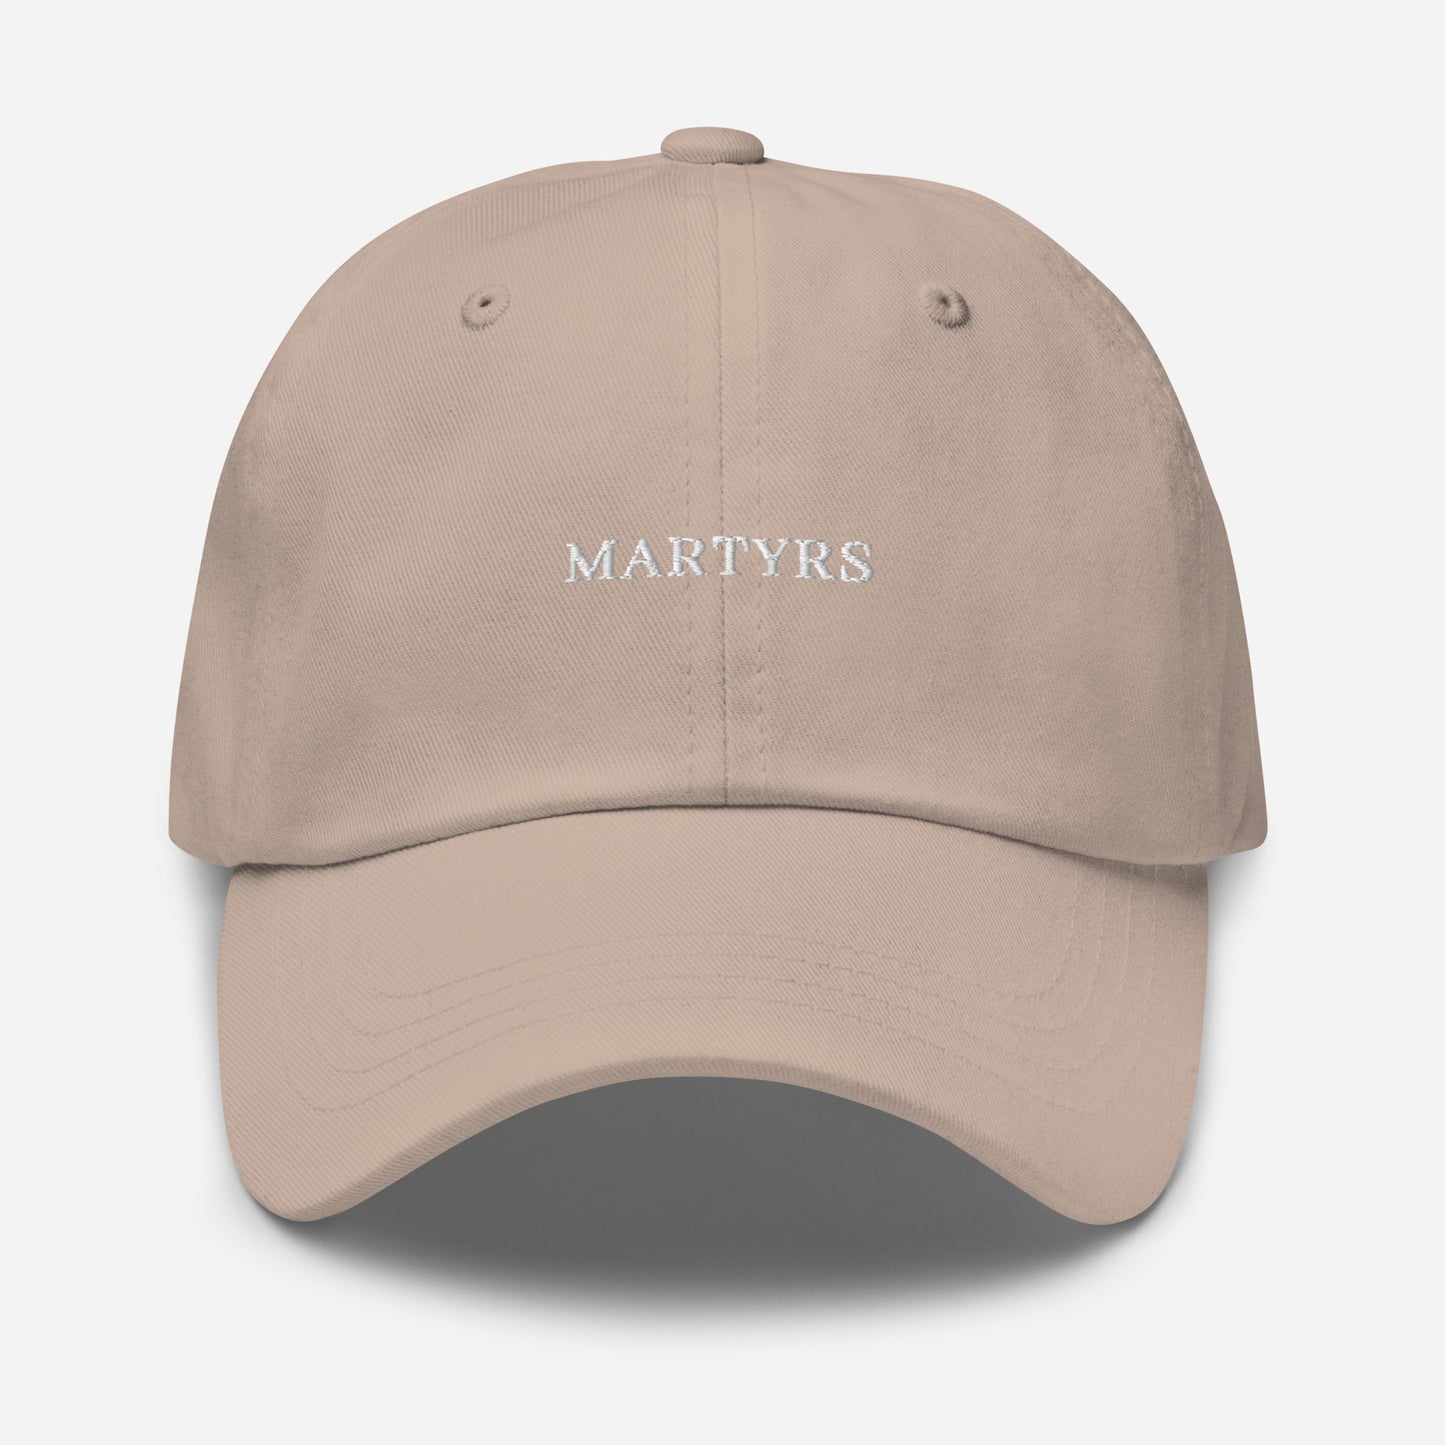 Martyrs - STONE Classic Dad hat - WHITE FONT broderie